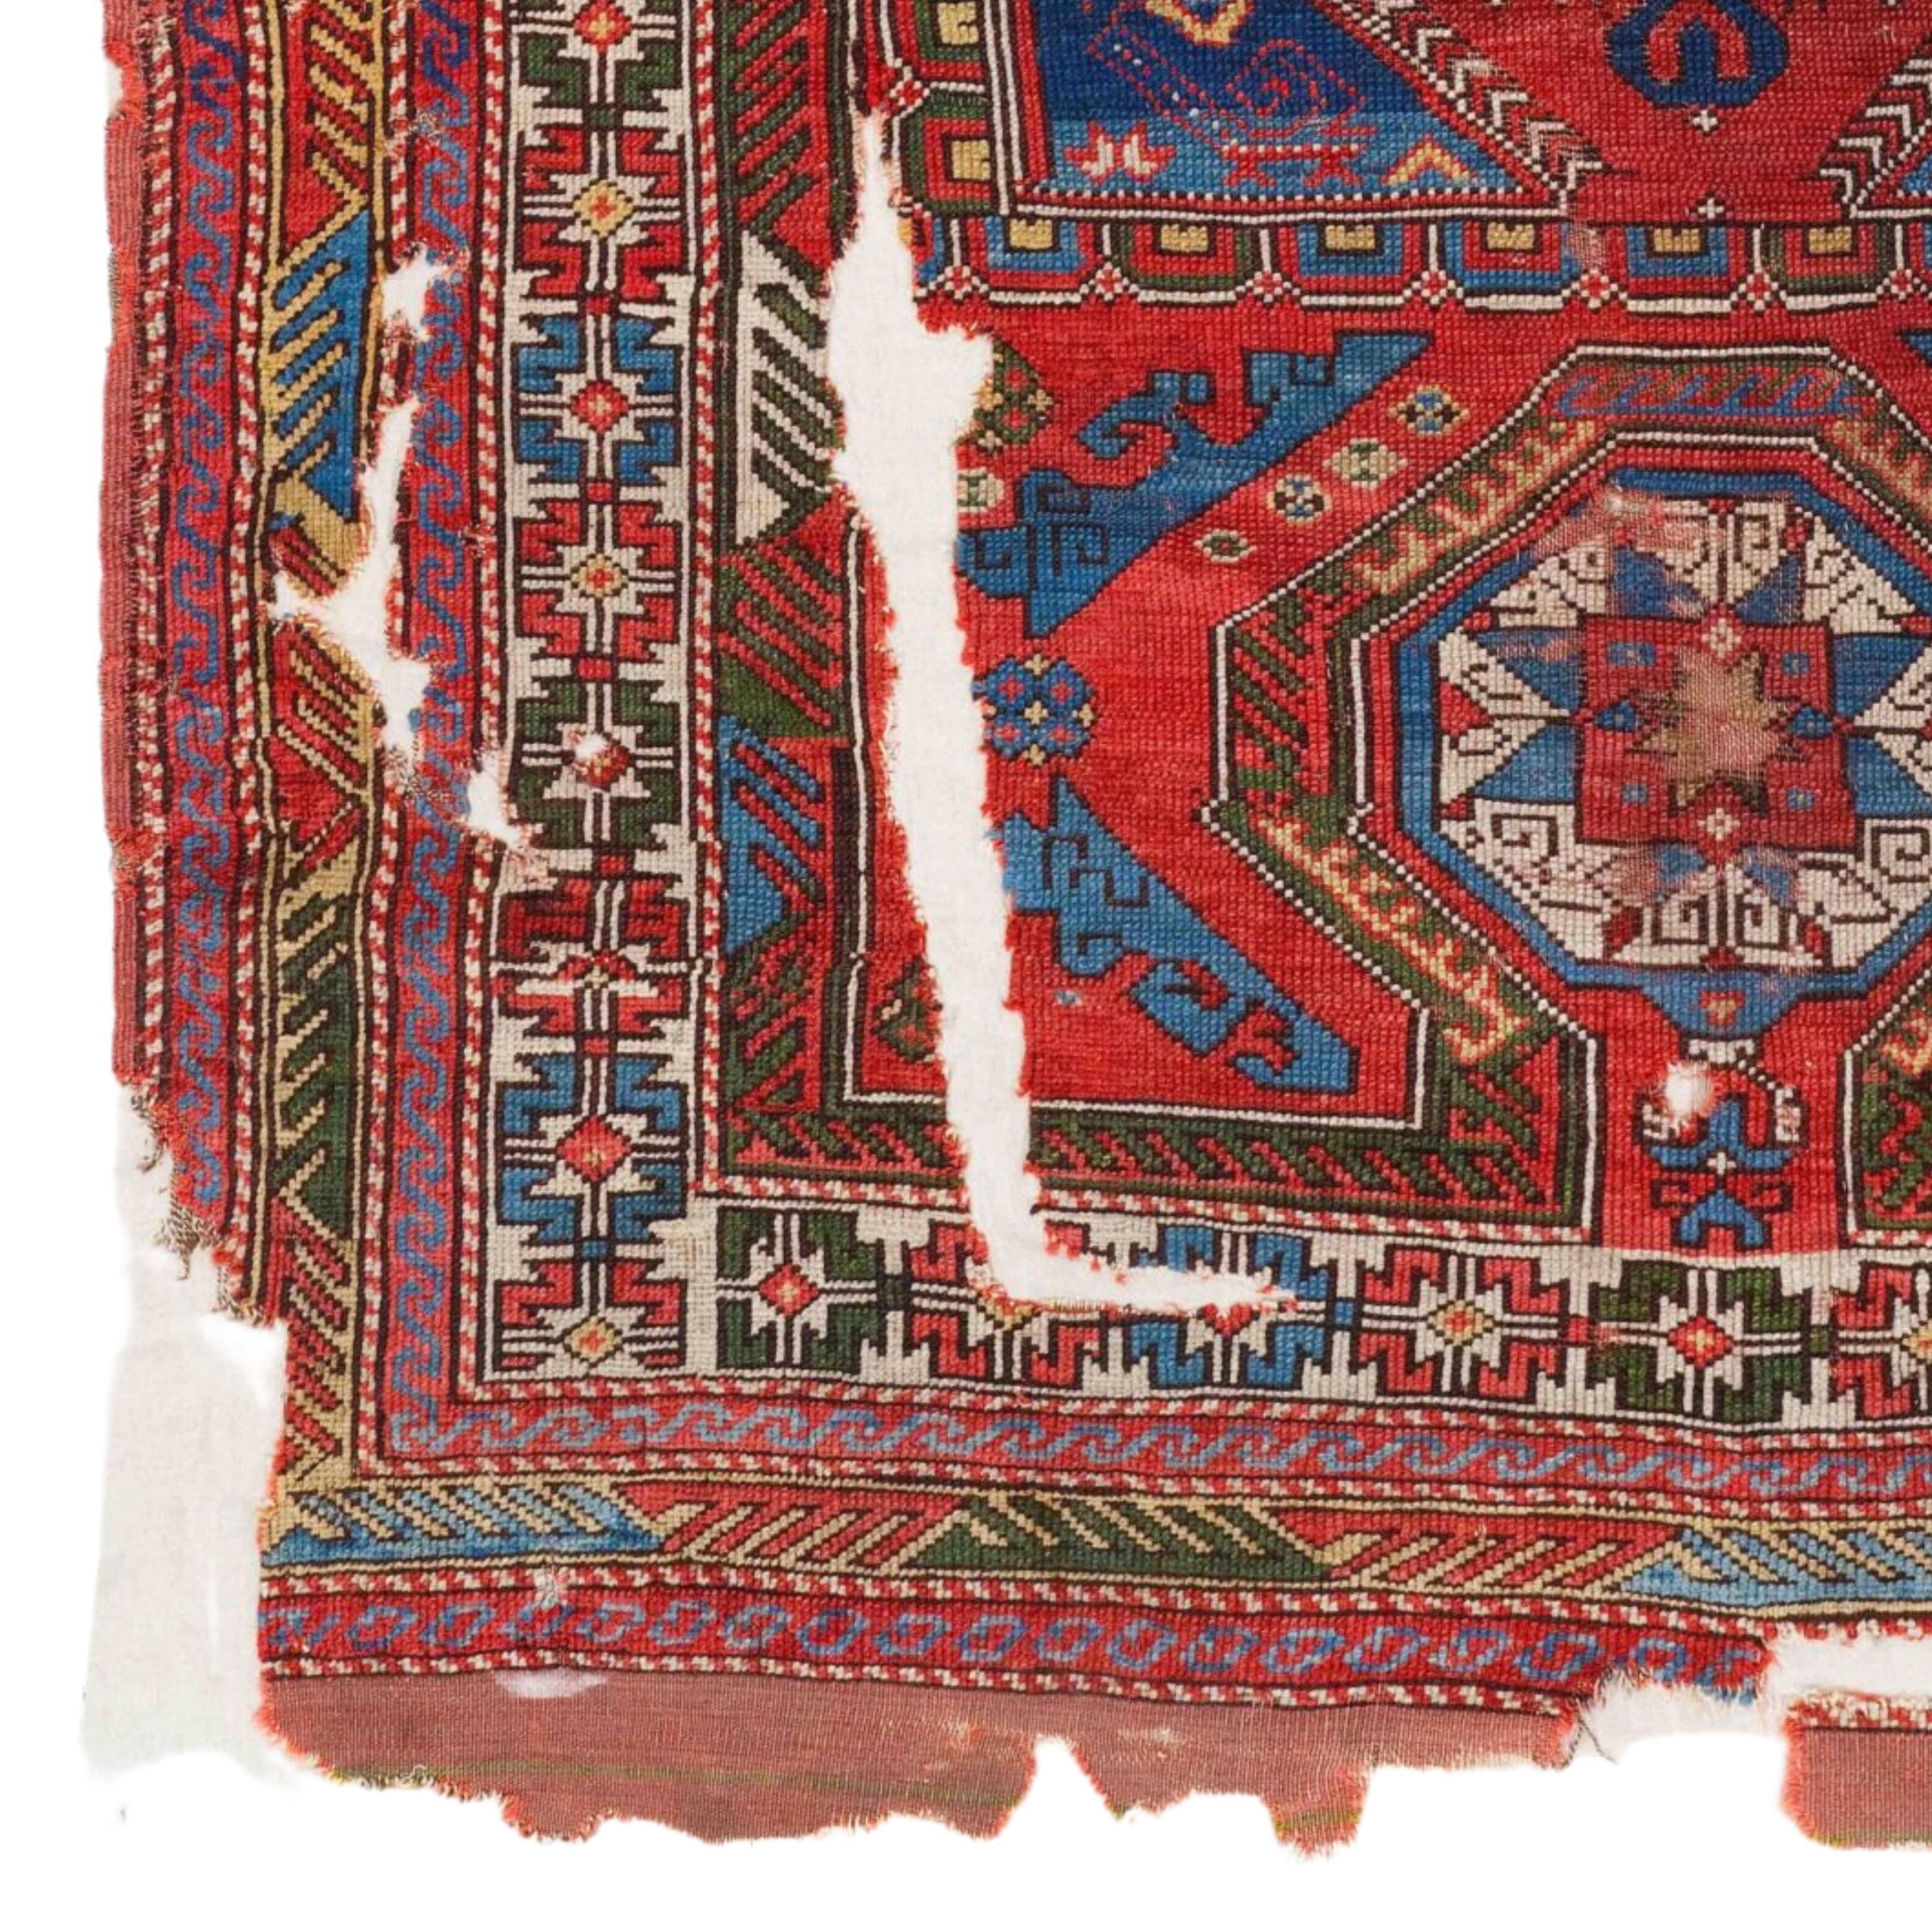 Antique Bergama Fragment - Anatolian Rugs
Early 18th Century Anatolian Bergama Rug Fragment
Size: 147 x 200 cm (57,8x78,7 In)

Bergama carpet is one of several types of village floor coverings that are hand-woven around Bergama in western Turkey or